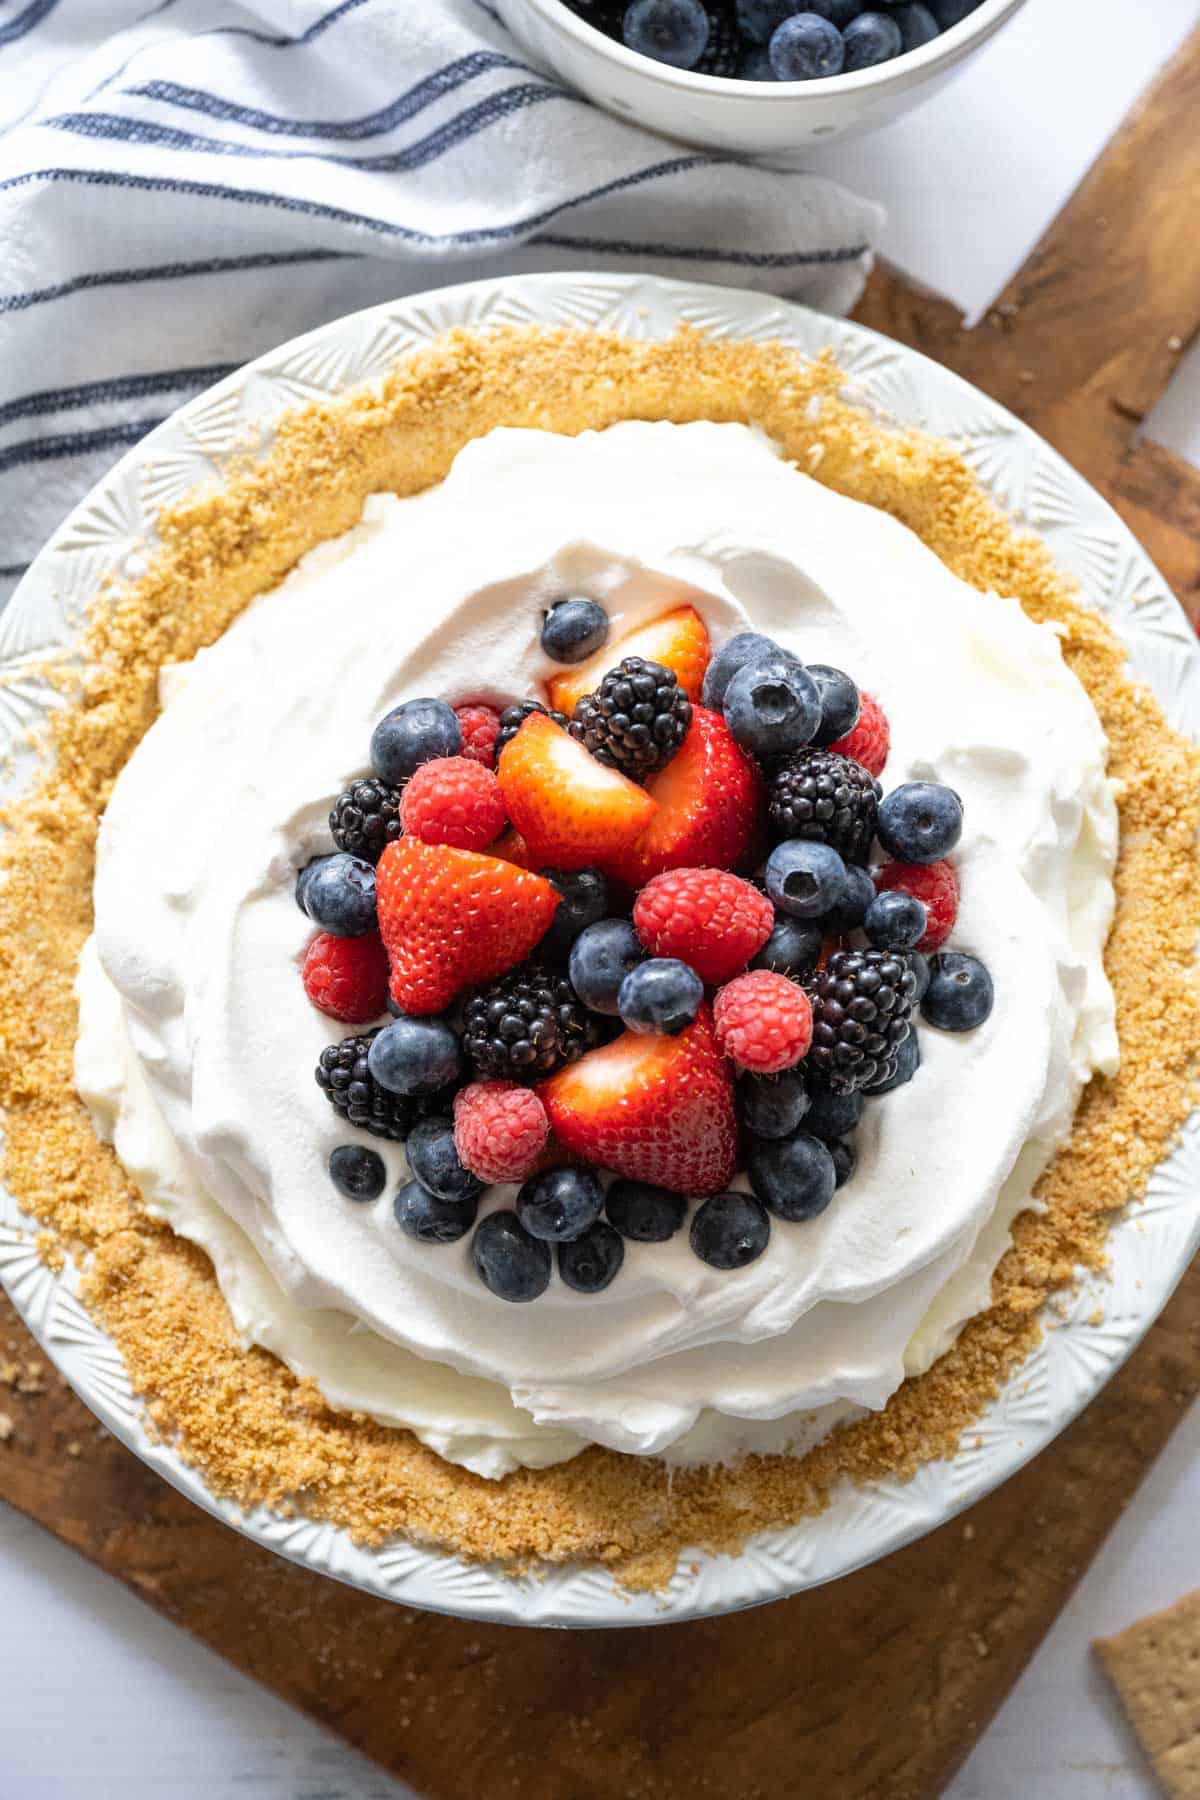 Overhead image of a whole red white and blueberry cream pie on a wooden board with scatter graham cracker crust crumbs and a bowl of berries.